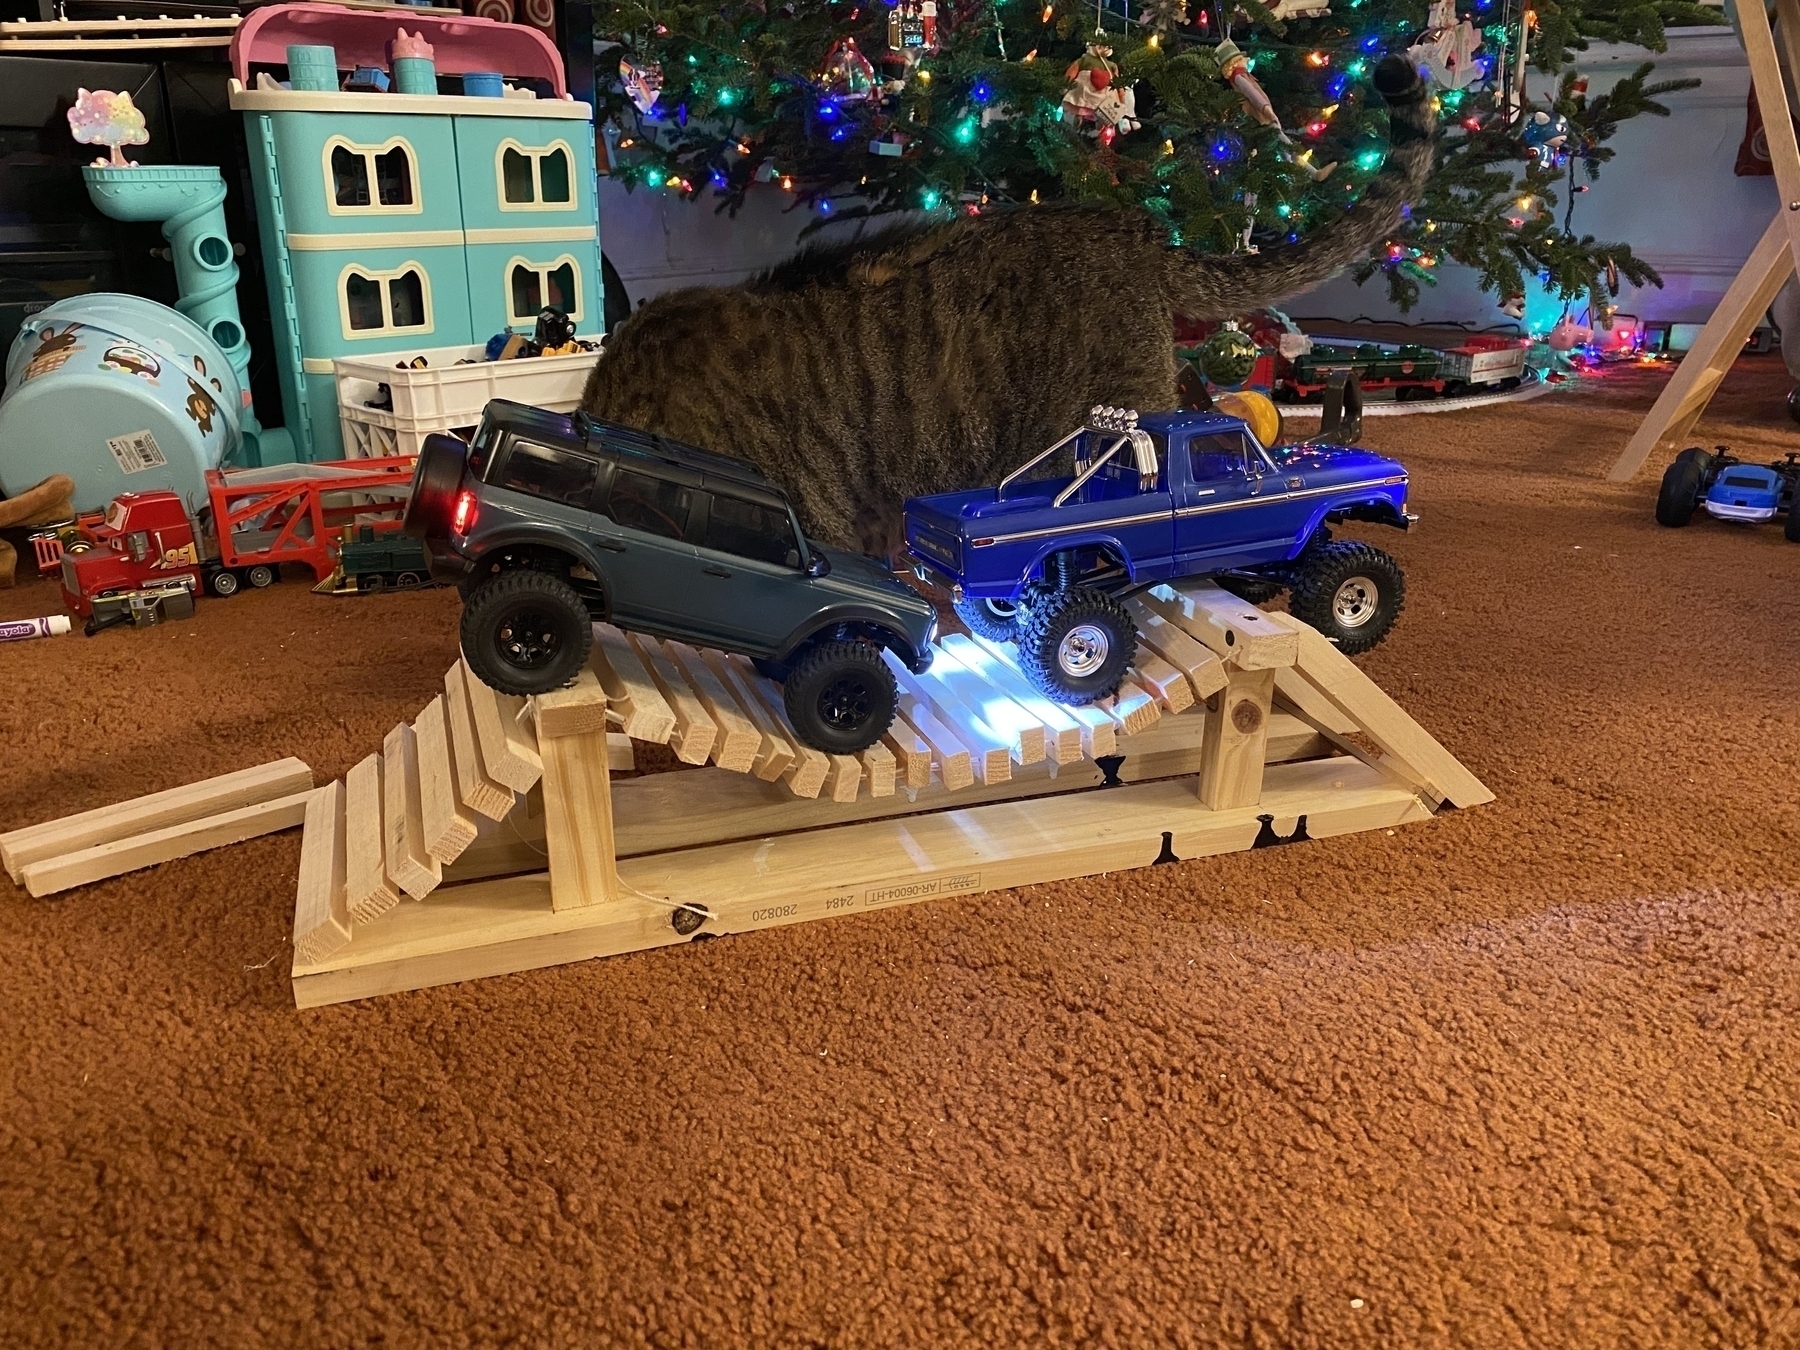 Two 1/18th scale rc crawler trucks on a homemade mini rope bridge. In the background is a car, kid’s toys, a Christmas tree, and a Christmas train.